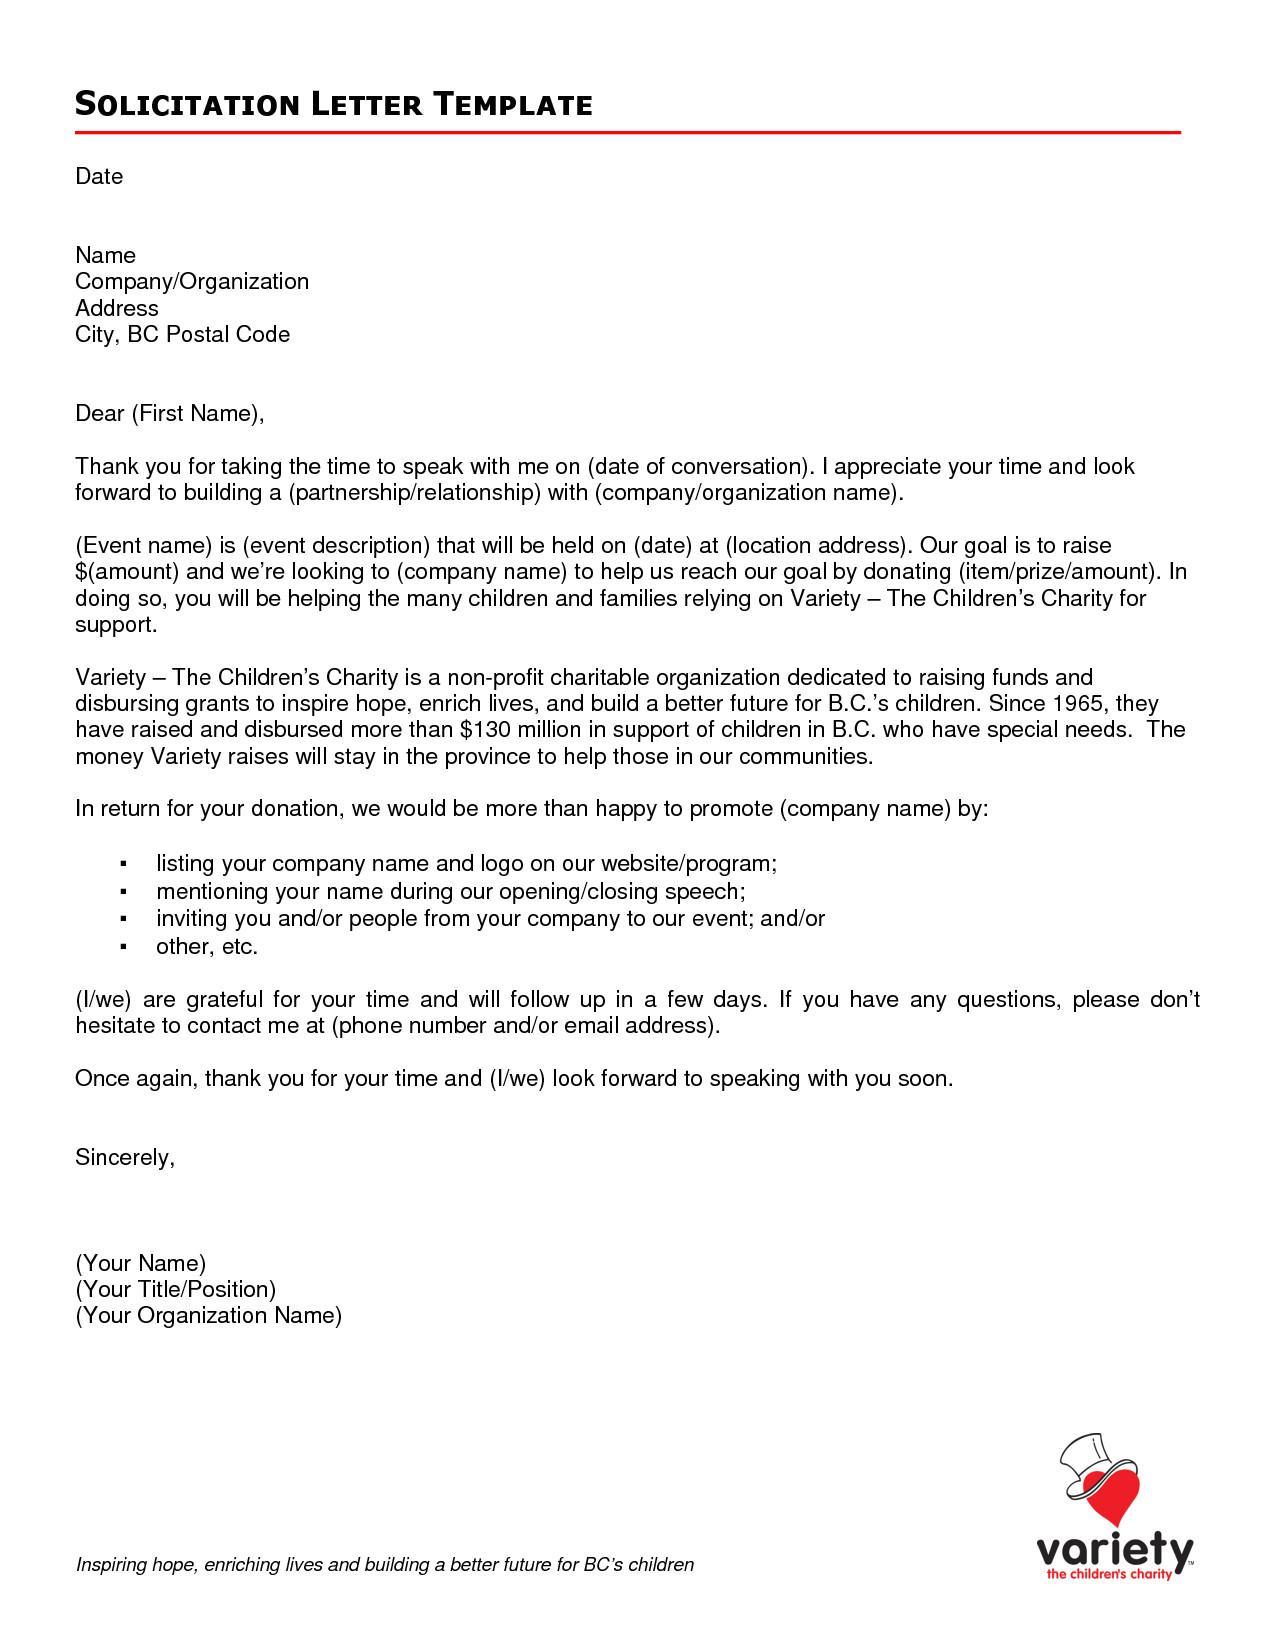 business solicitation letter template